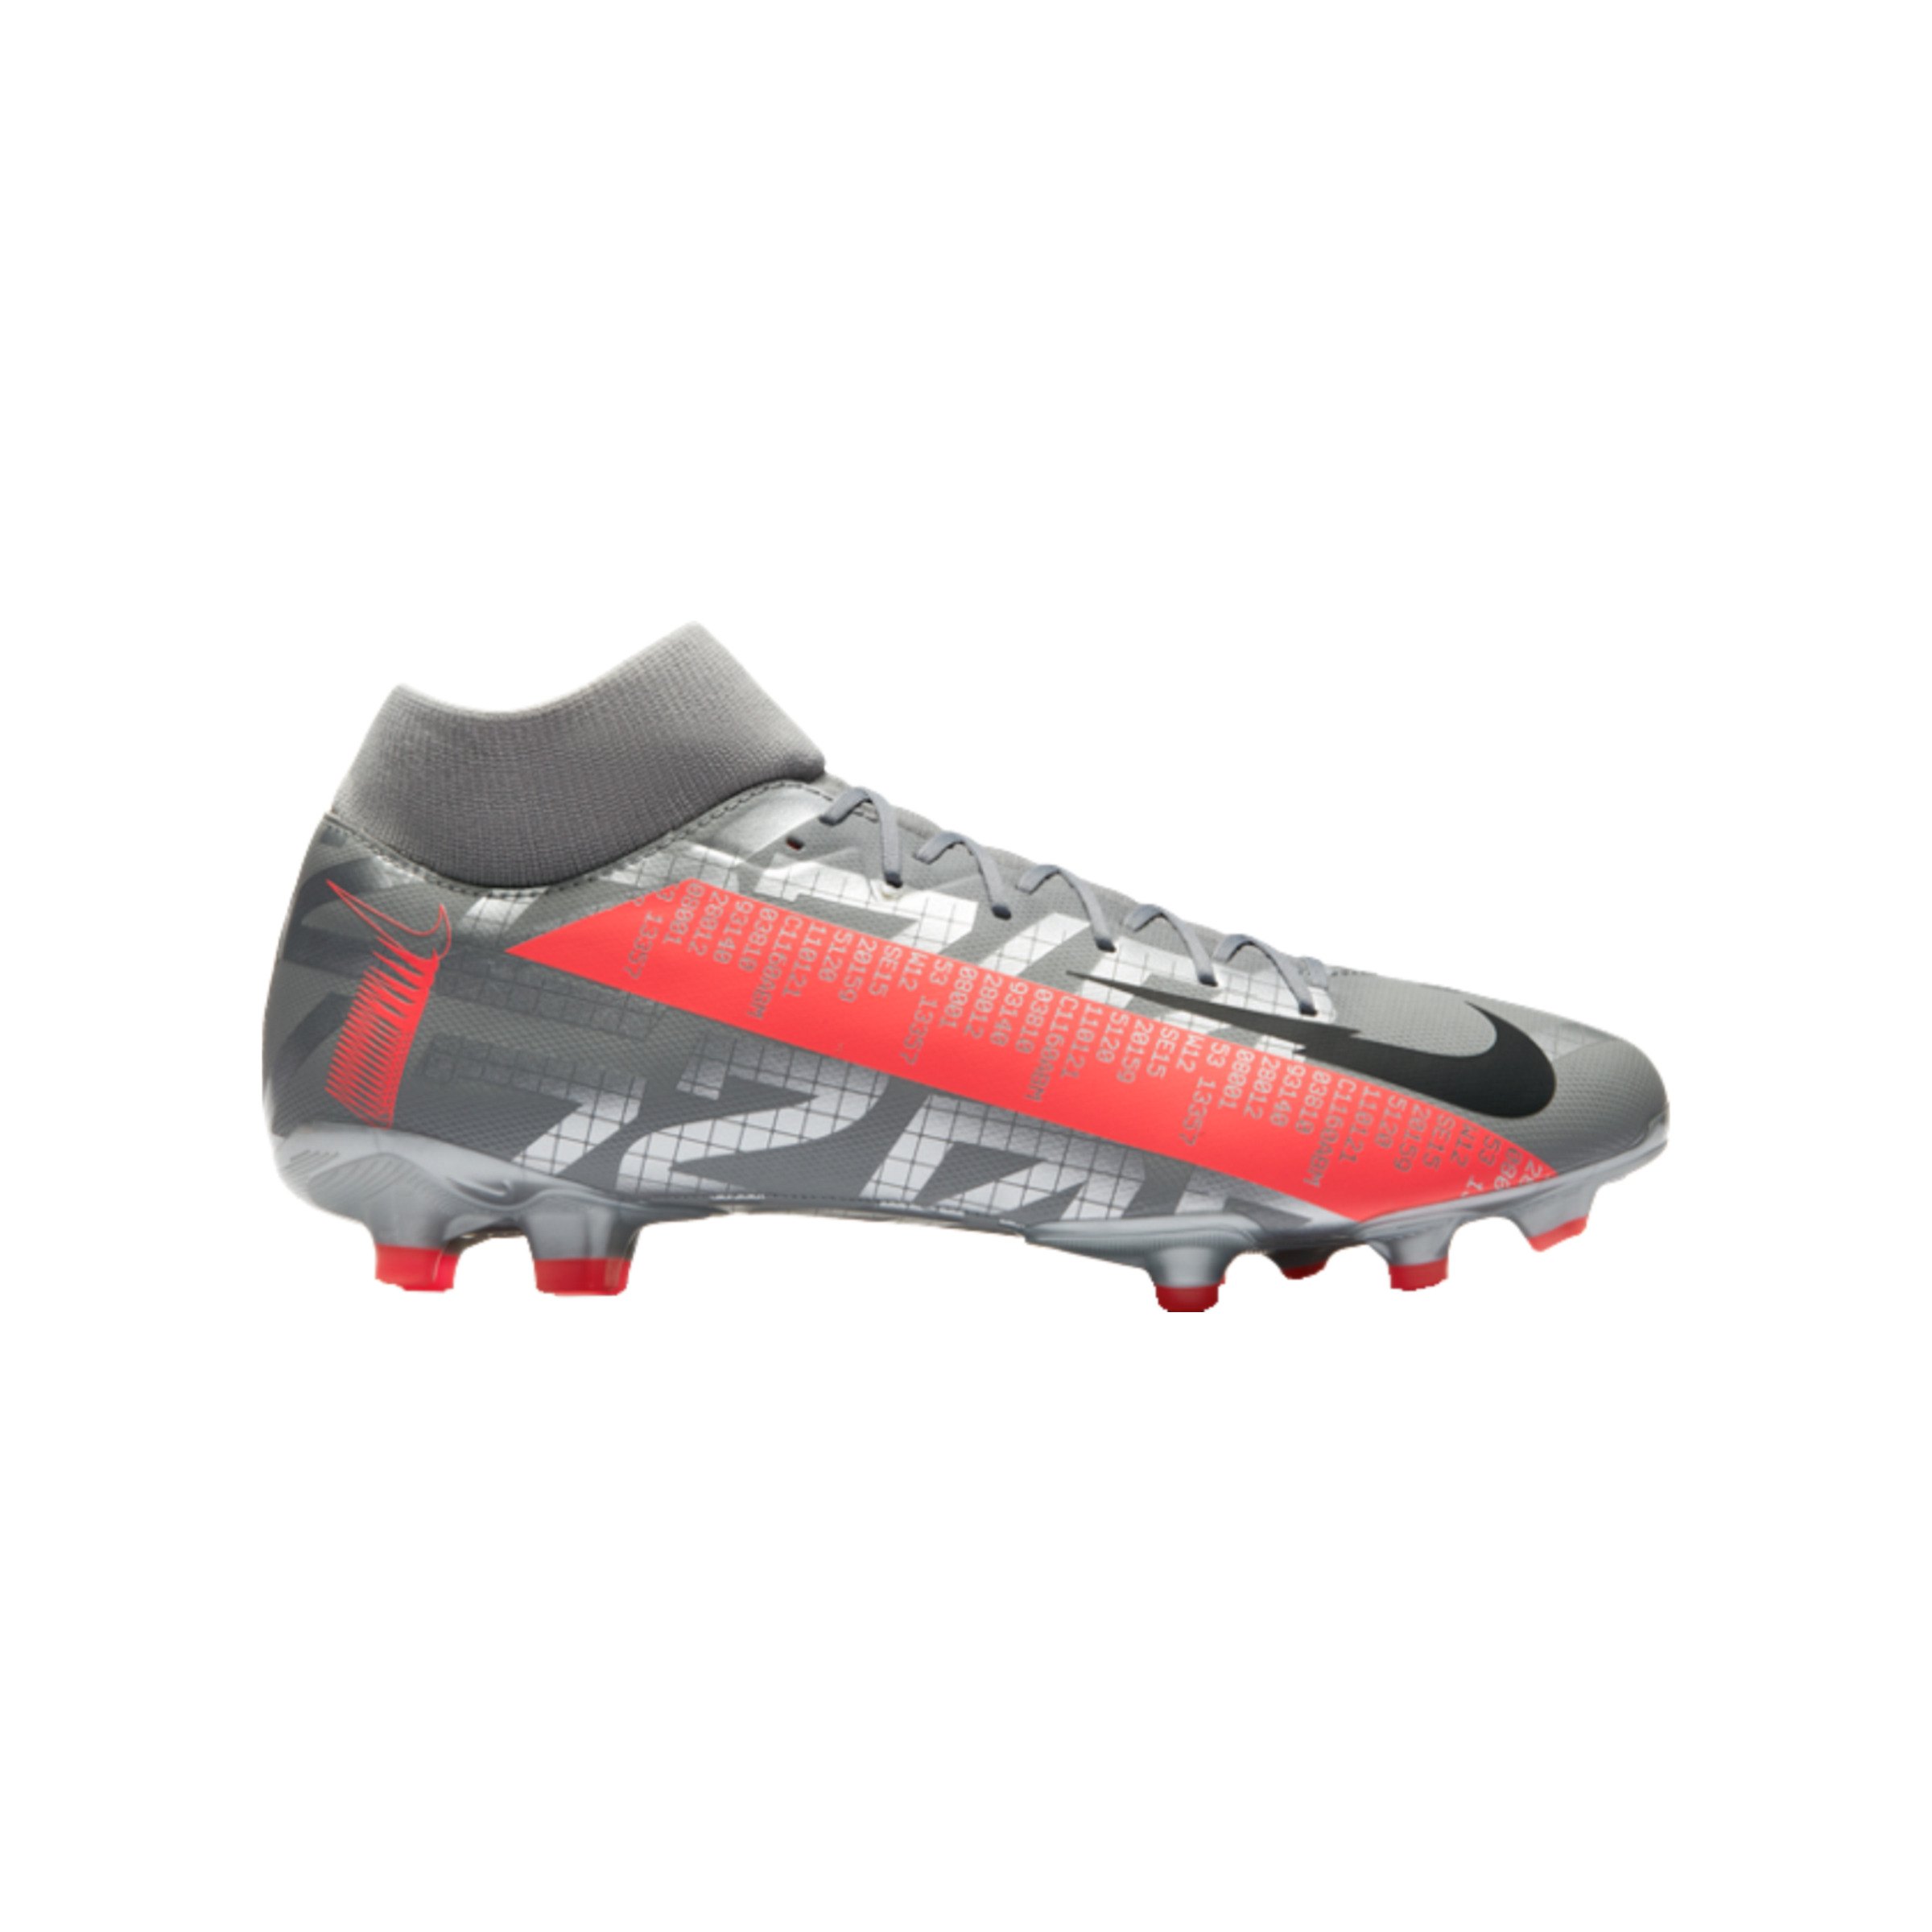 eastbay youth football cleats